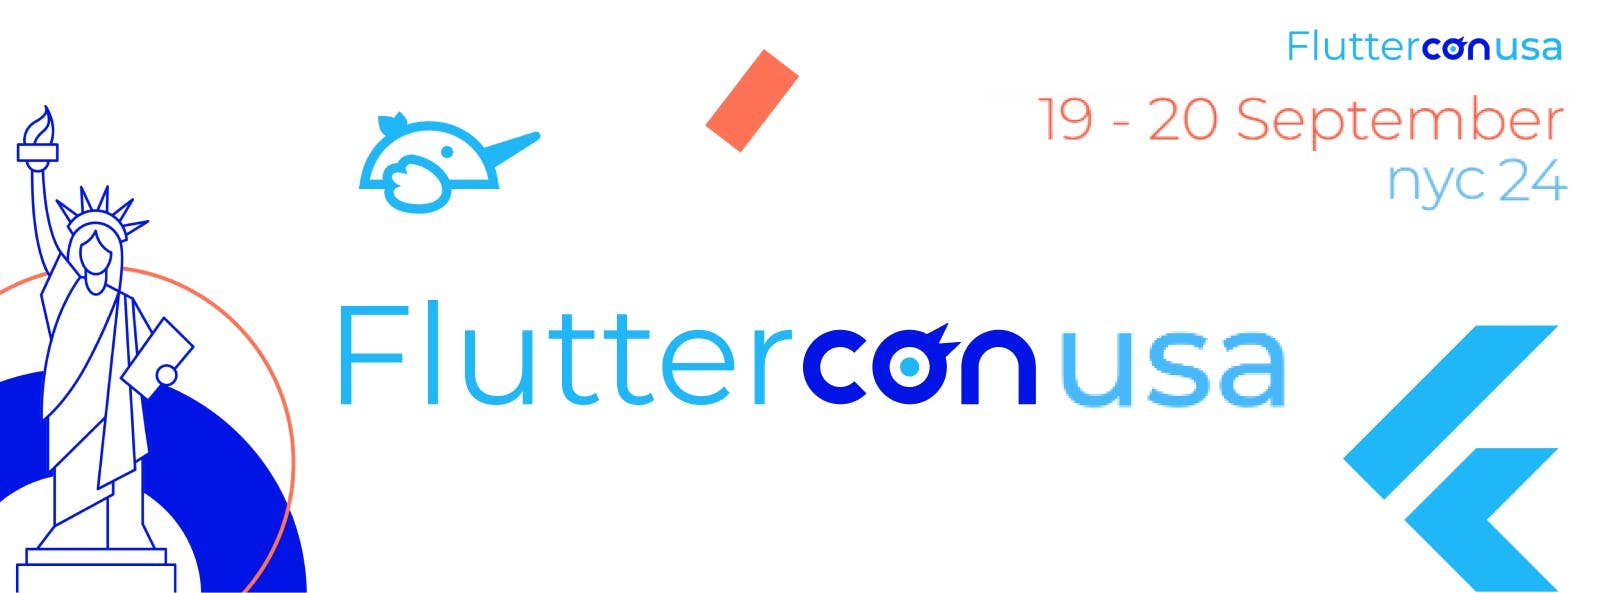 Fluttercon USA - Flutter conference in New York